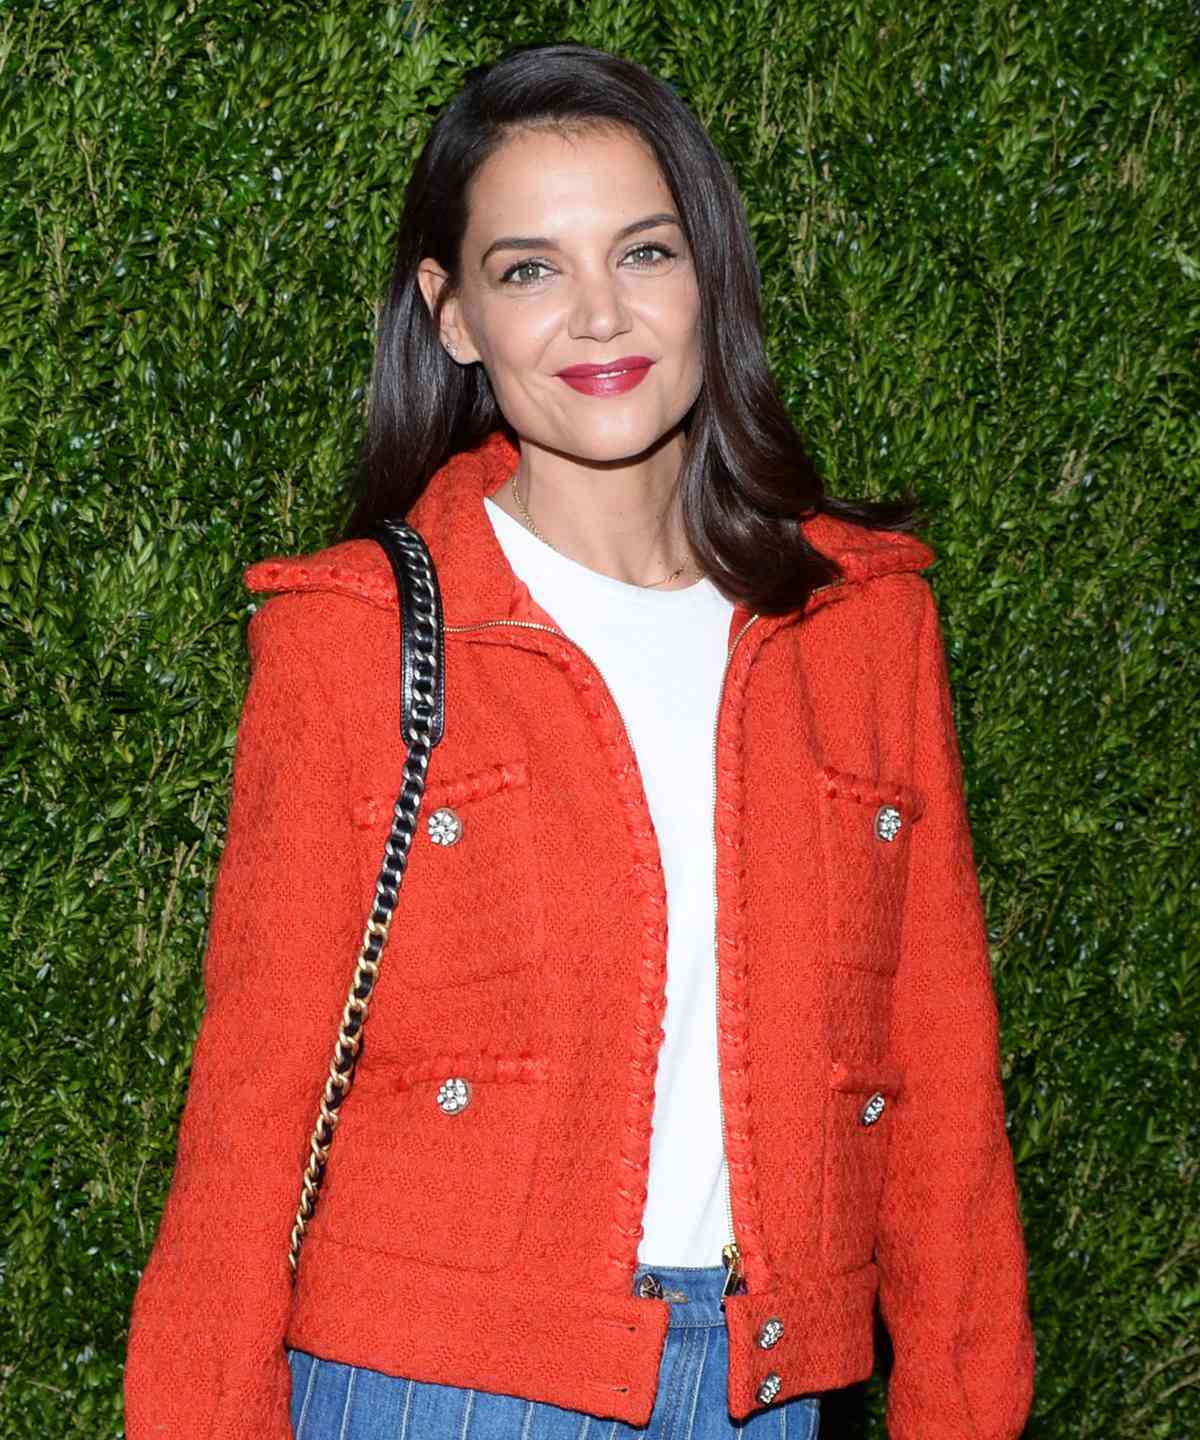  Katie Holmes’s Sexy Leggings Look Like Pants — and They’re Currently $50 Off on Amazon for Black Friday